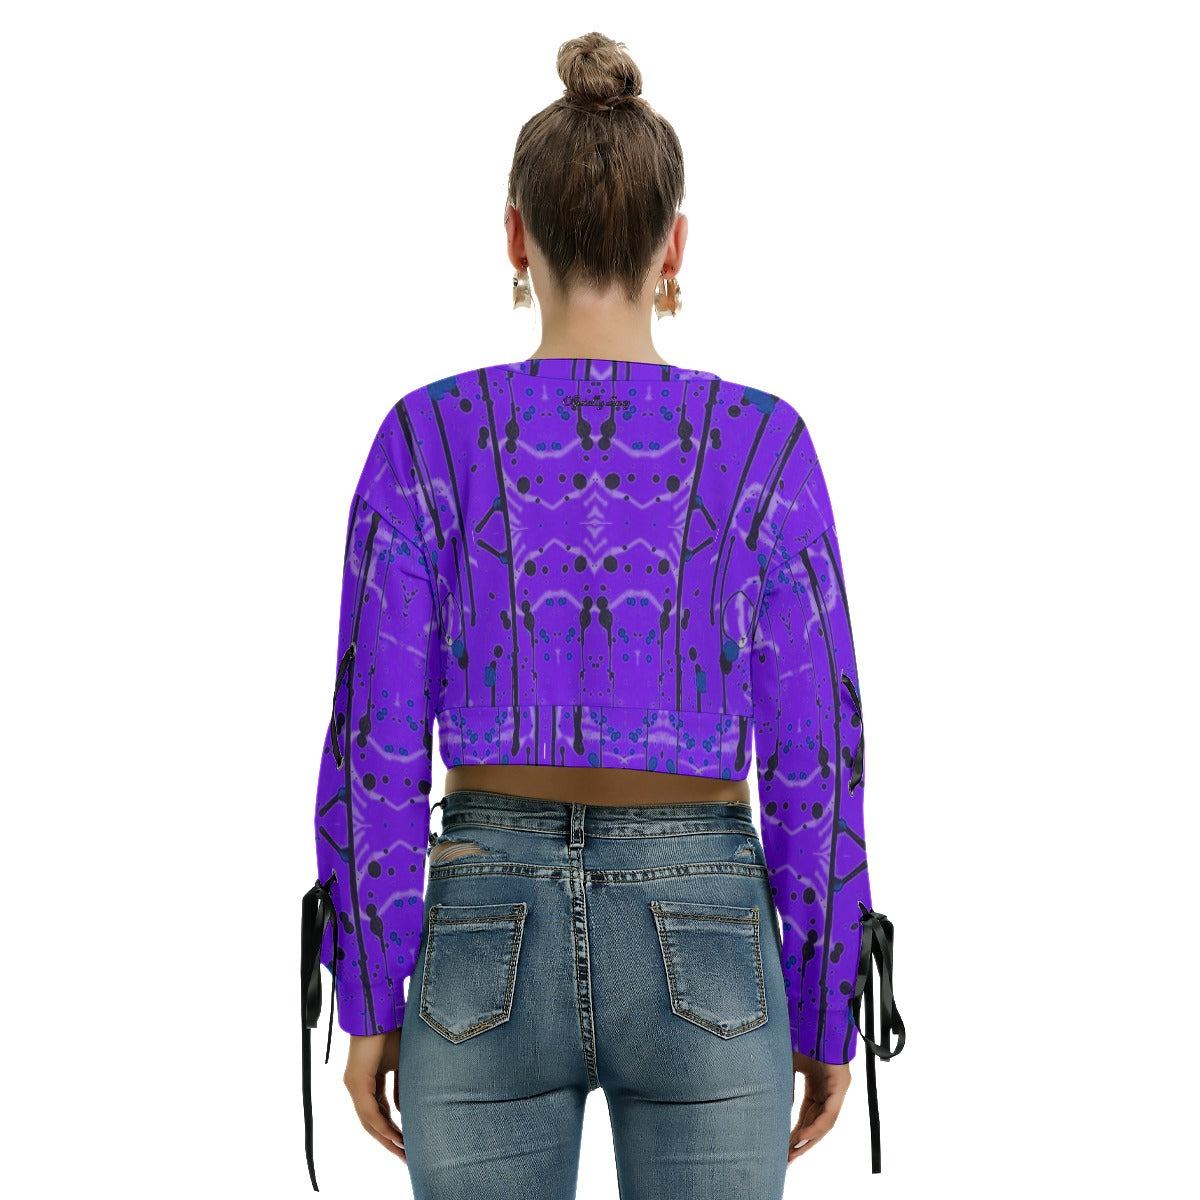 Officially Sexy Creepy Boy Collection Women's Long Sleeve Cropped Dark Purple Sweatshirt With Lace-up SleevesLeft Side View